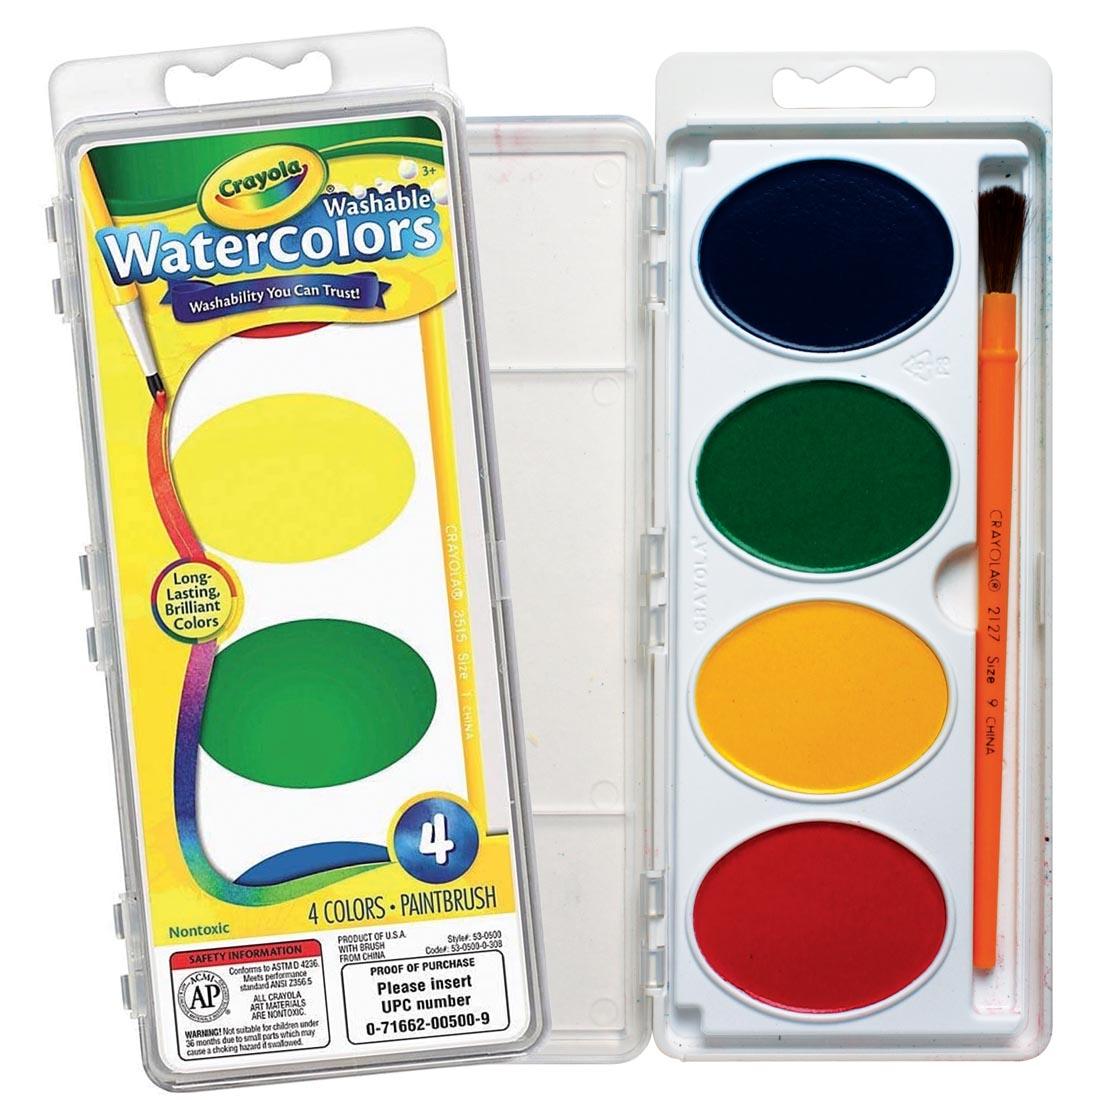 package of Crayola Jumbo Pan Washable Watercolors, shown both closed and open